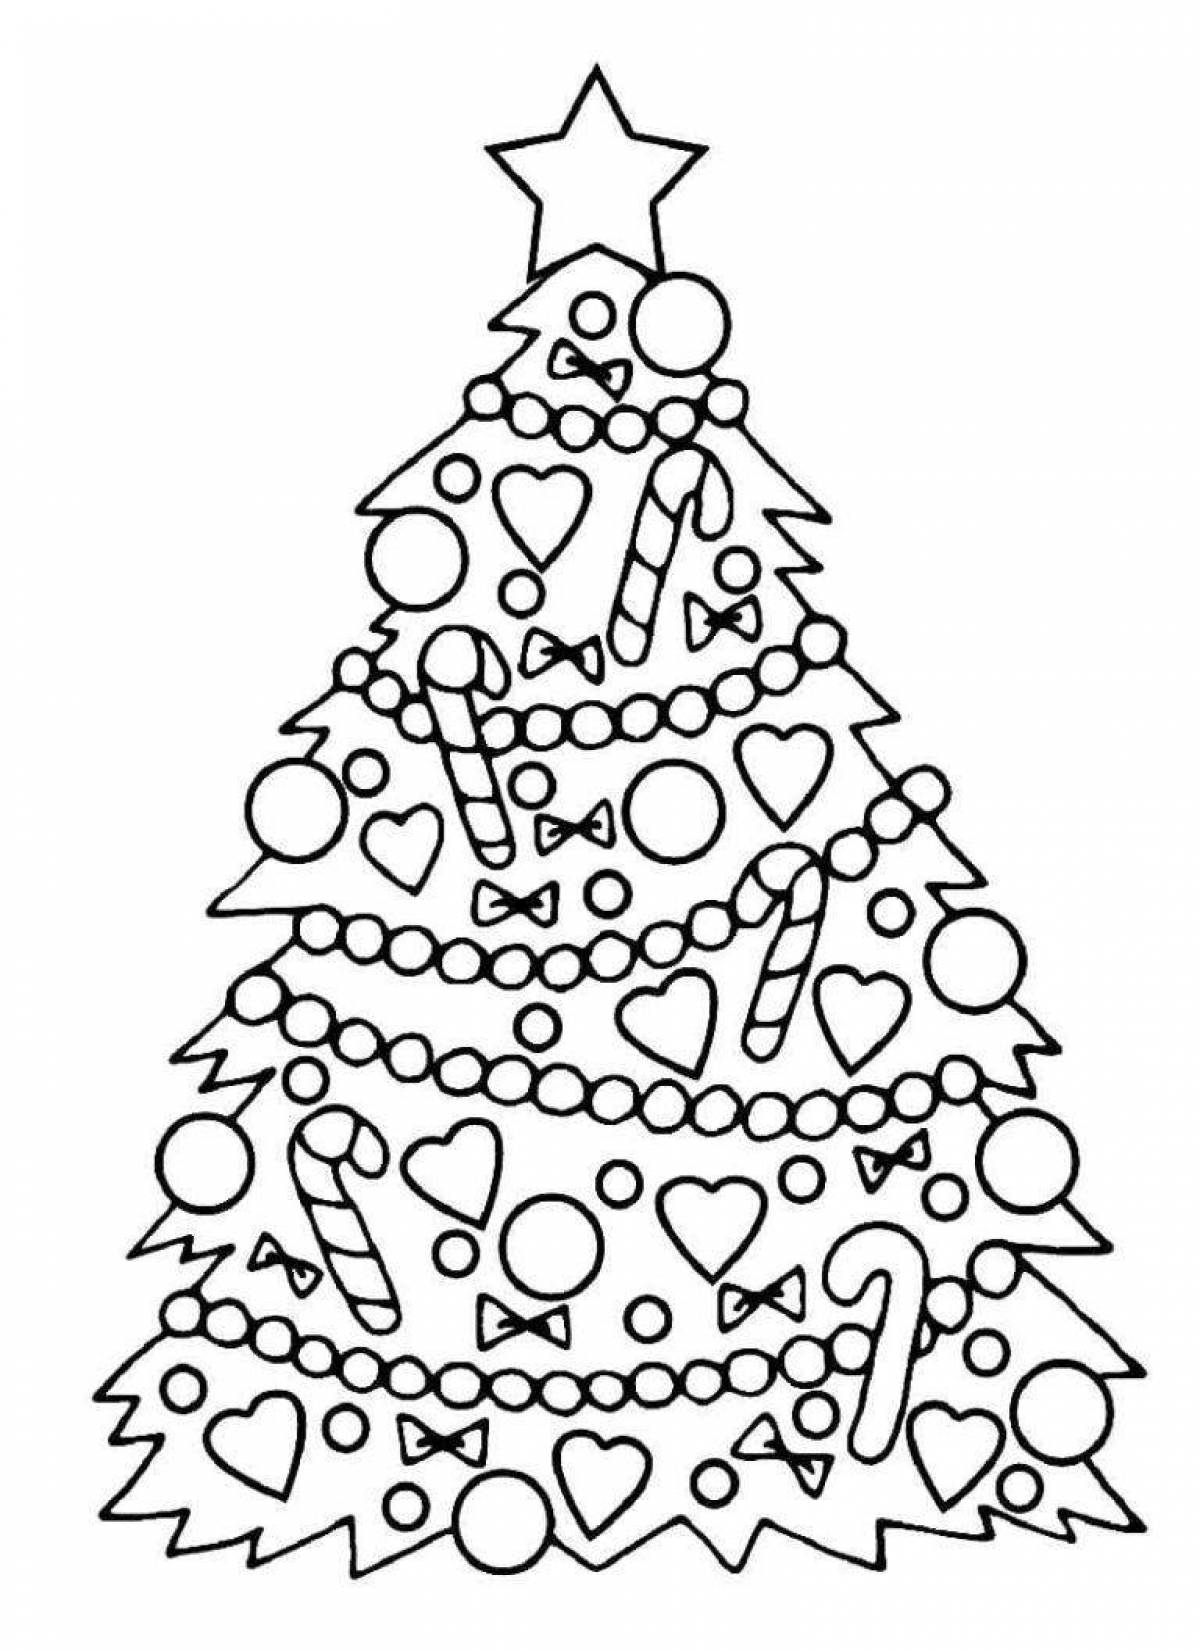 Awesome Christmas tree coloring book